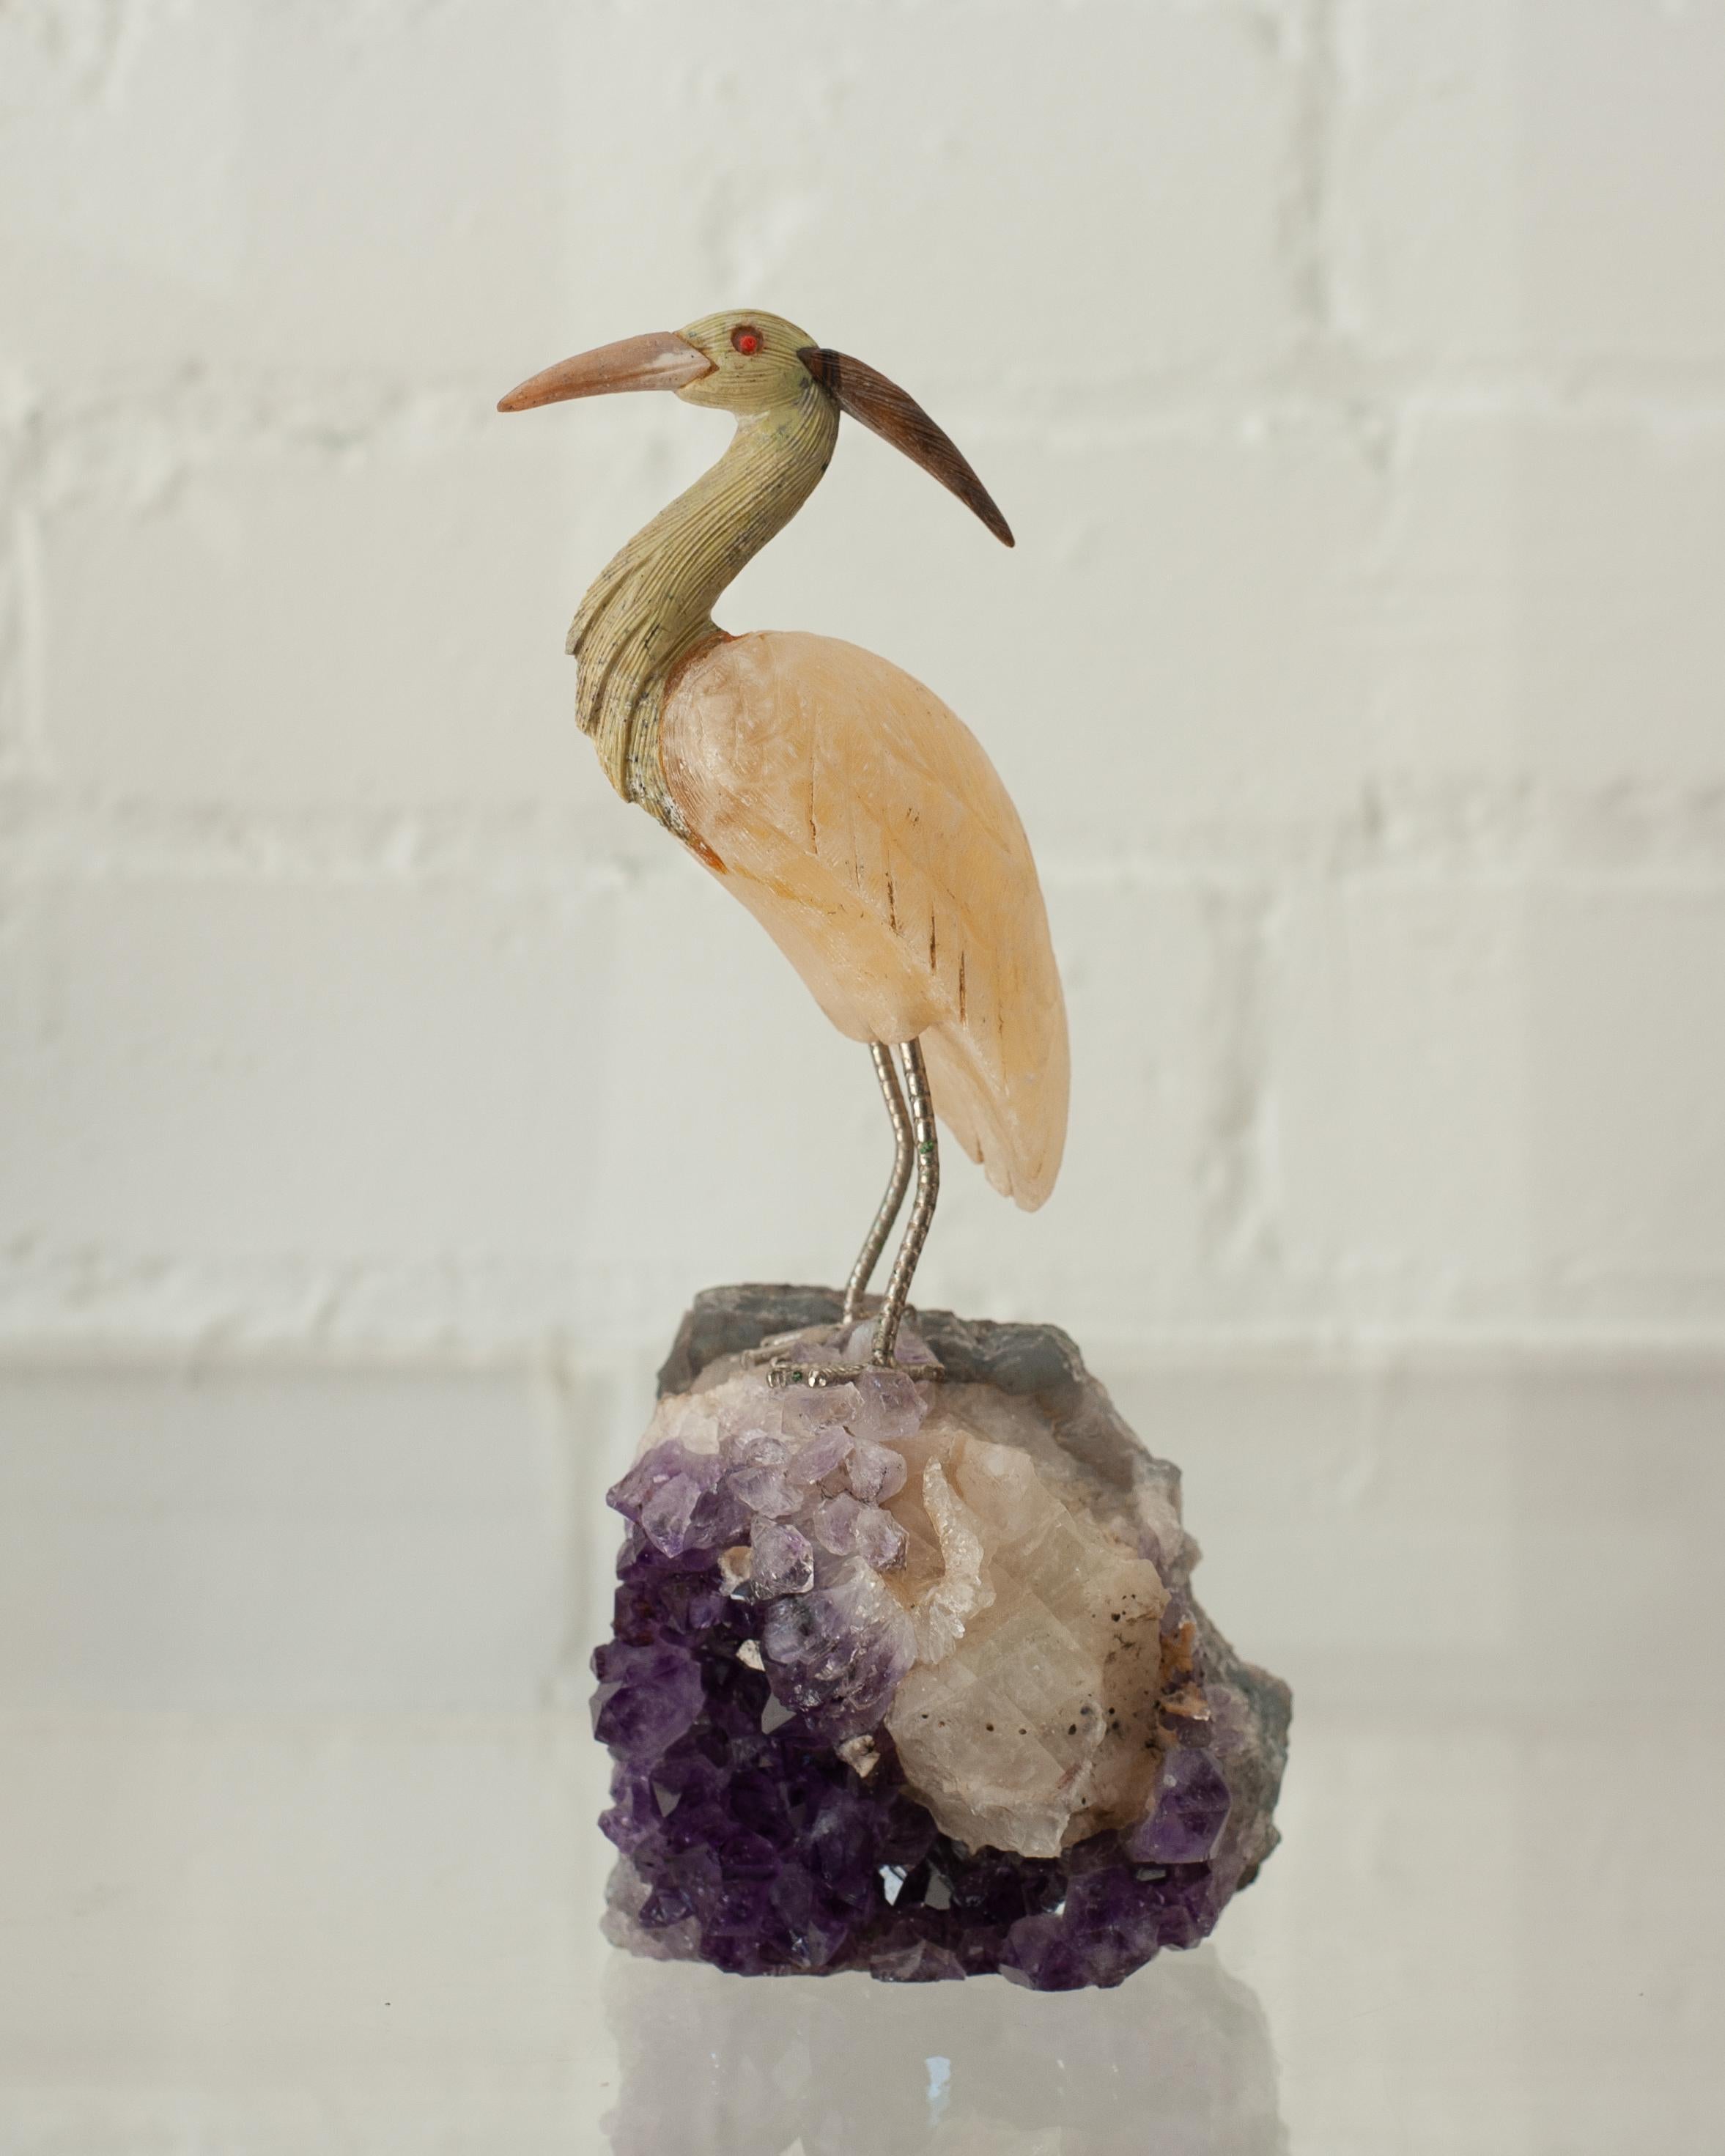 A beautiful hand carved semi precious stone crane mounted on an amethyst mineral specimen base. This exotic bird is a decorative combination of ornithology and geology.